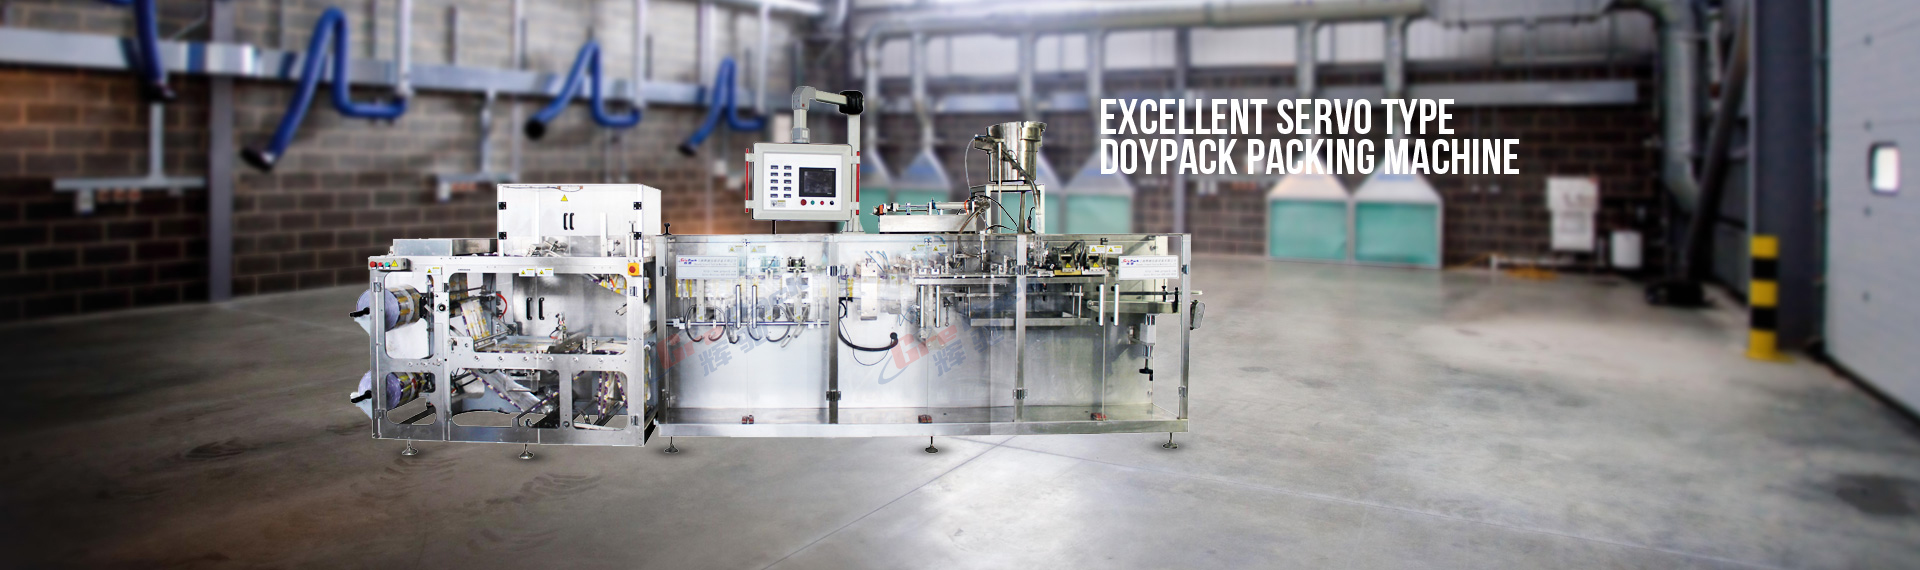 Doypack pouch packing machine